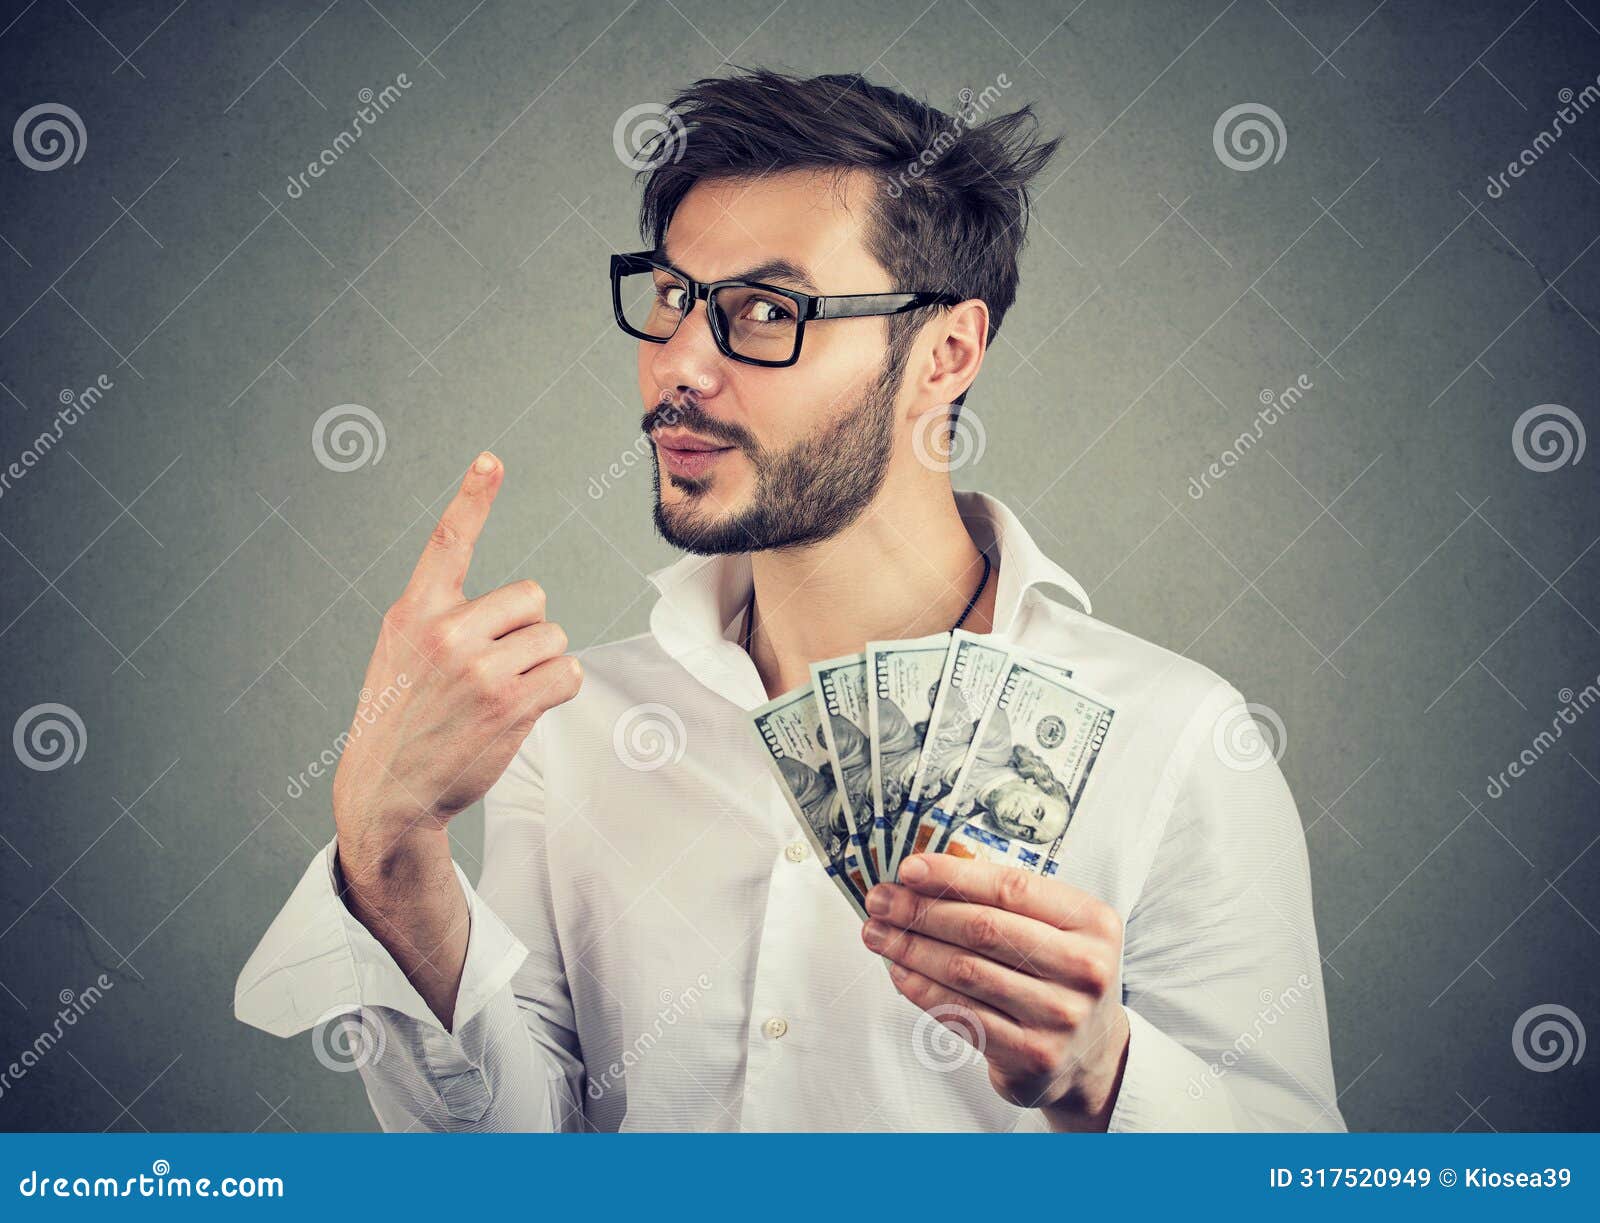 portrait of a sly business man with hundred dollar bills giving one piece of advice